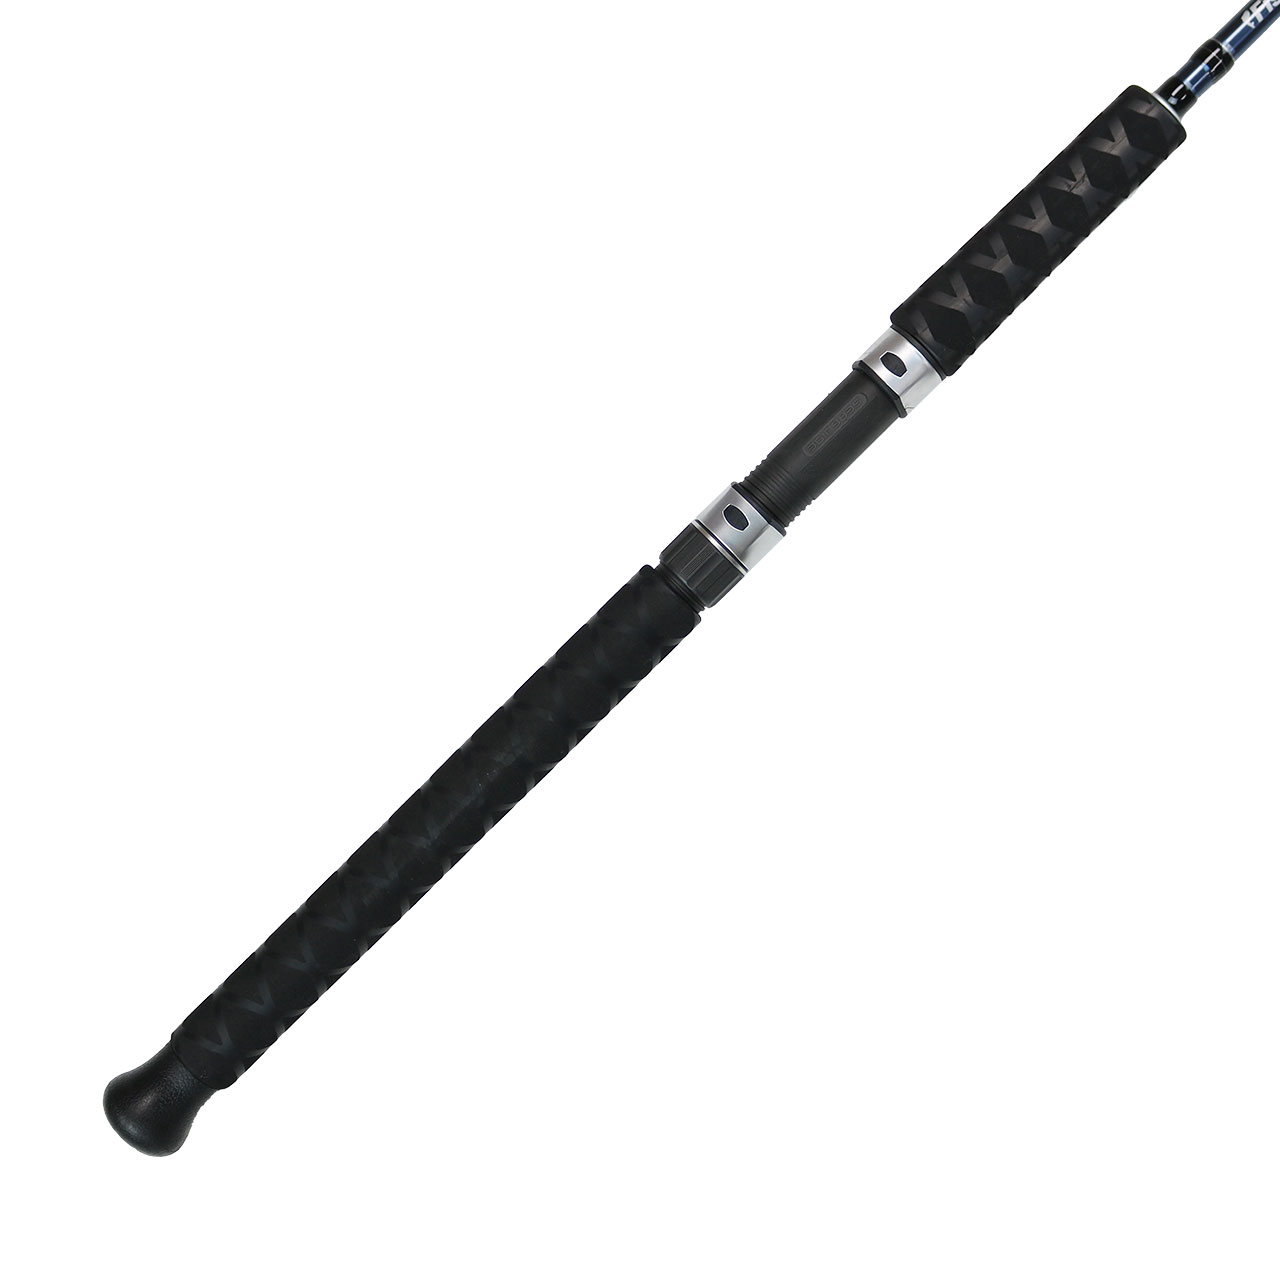 Telescopic Fishing Rod Fish Rod with Reel Fishing Pole for Trout Bass